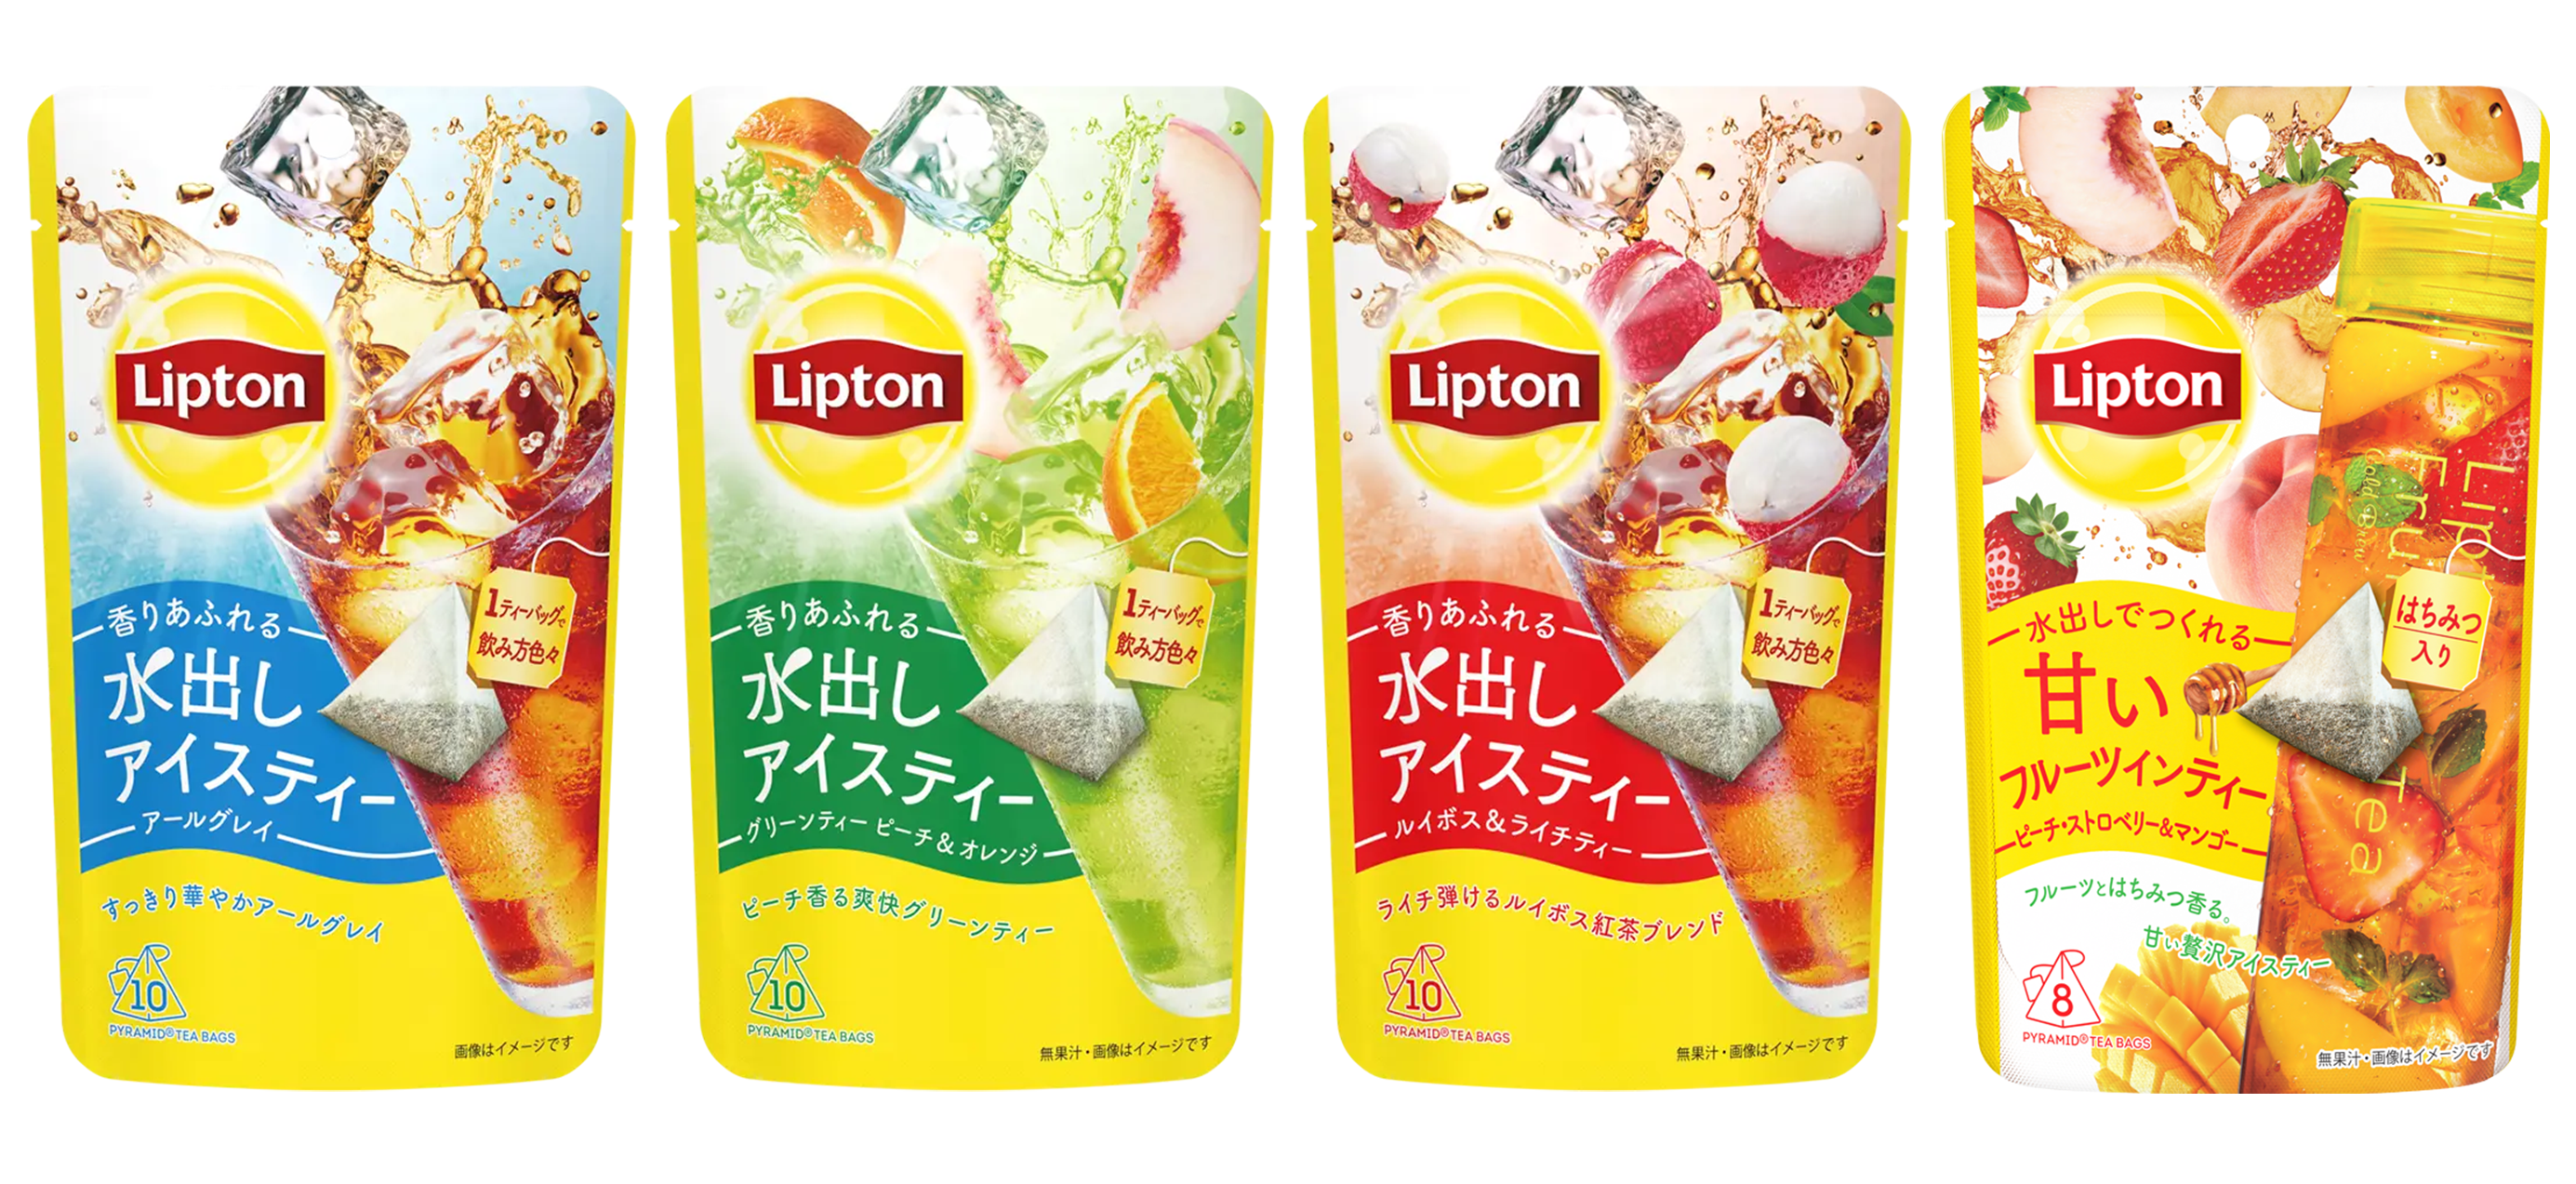 Renewal to cold brew iced tea full of juicy scent! | Lipton Japan